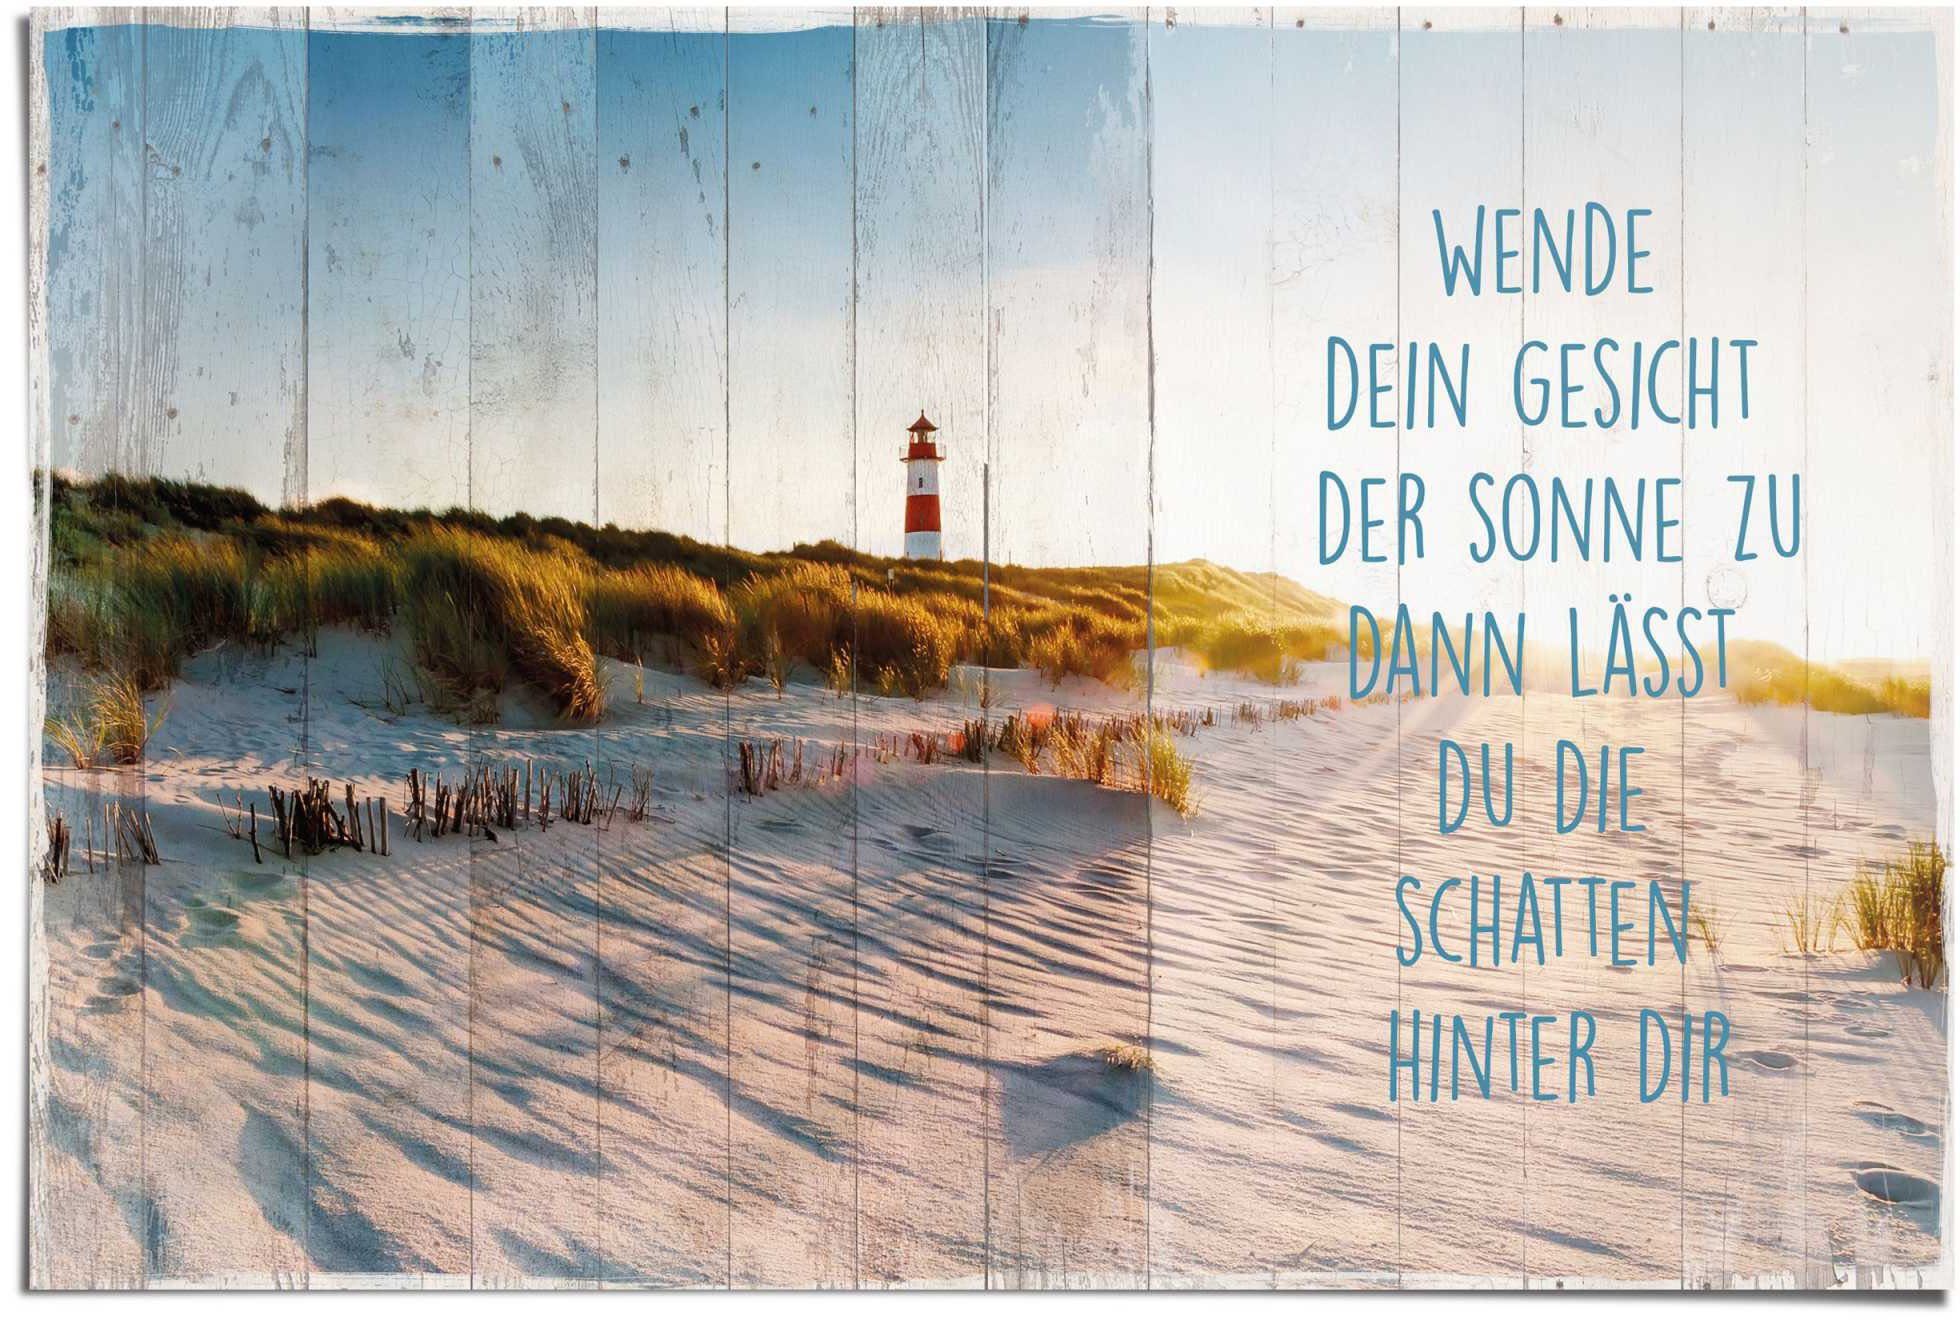 Reinders! St) Sonne Poster am (1 Strand,